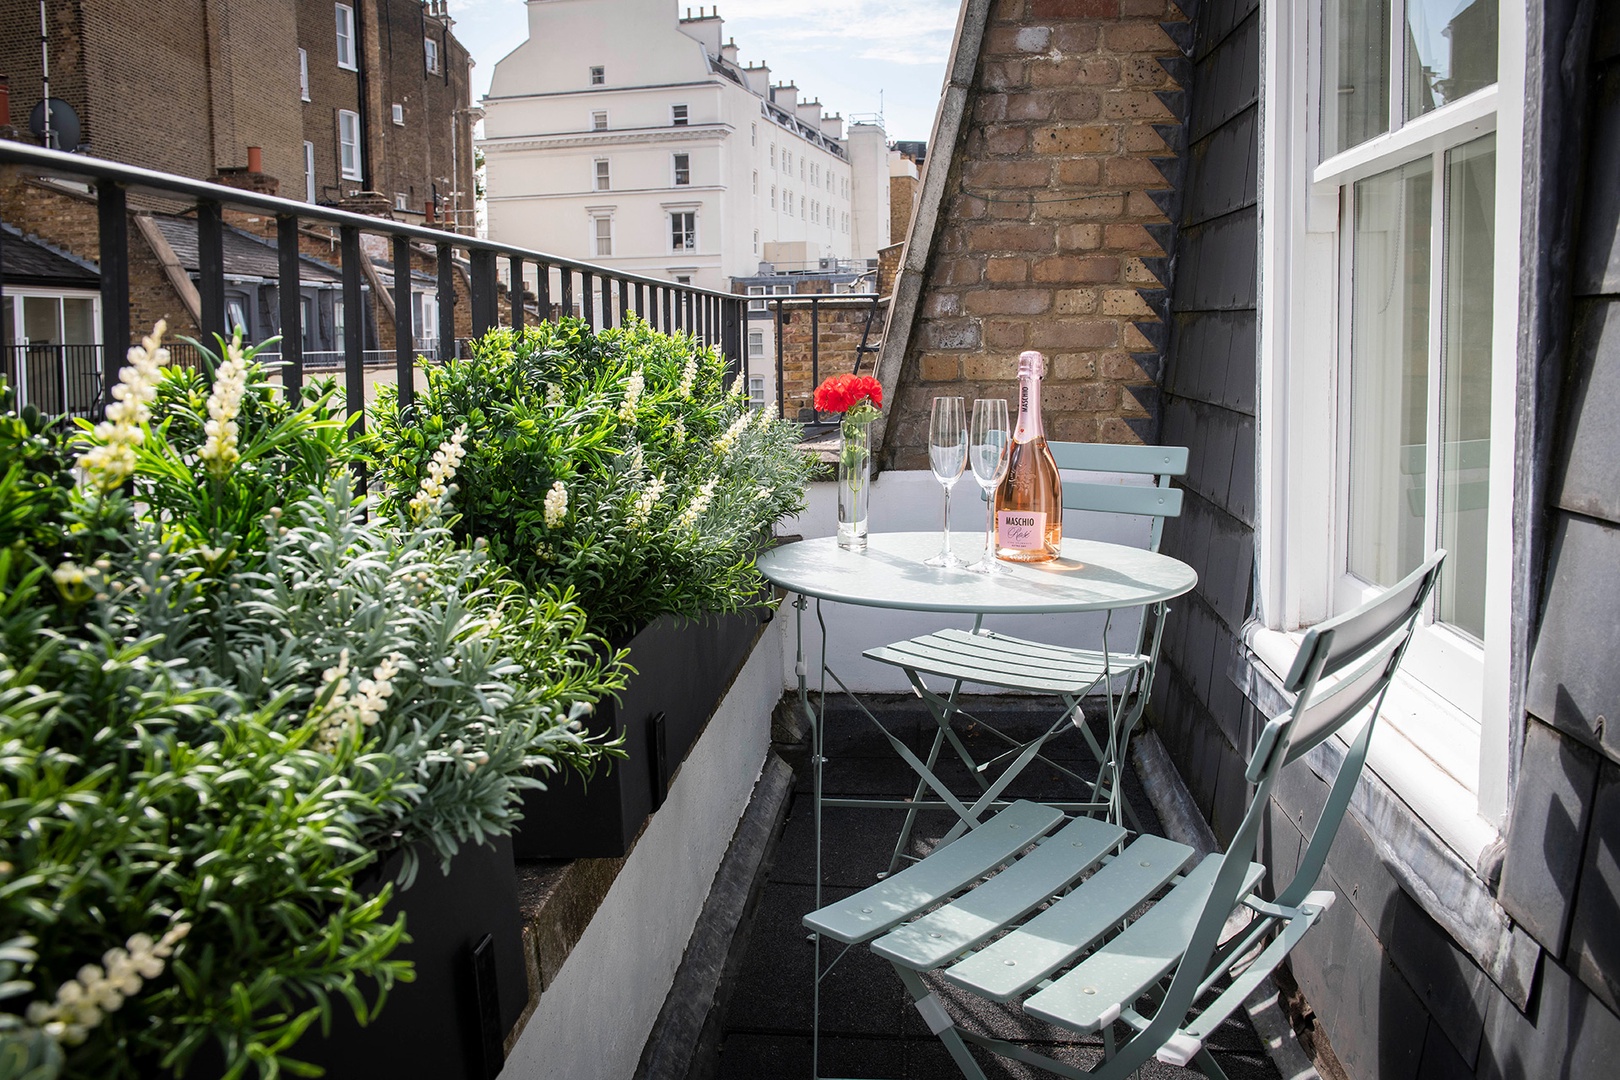 Lovely balcony overlooking a charming London mews.